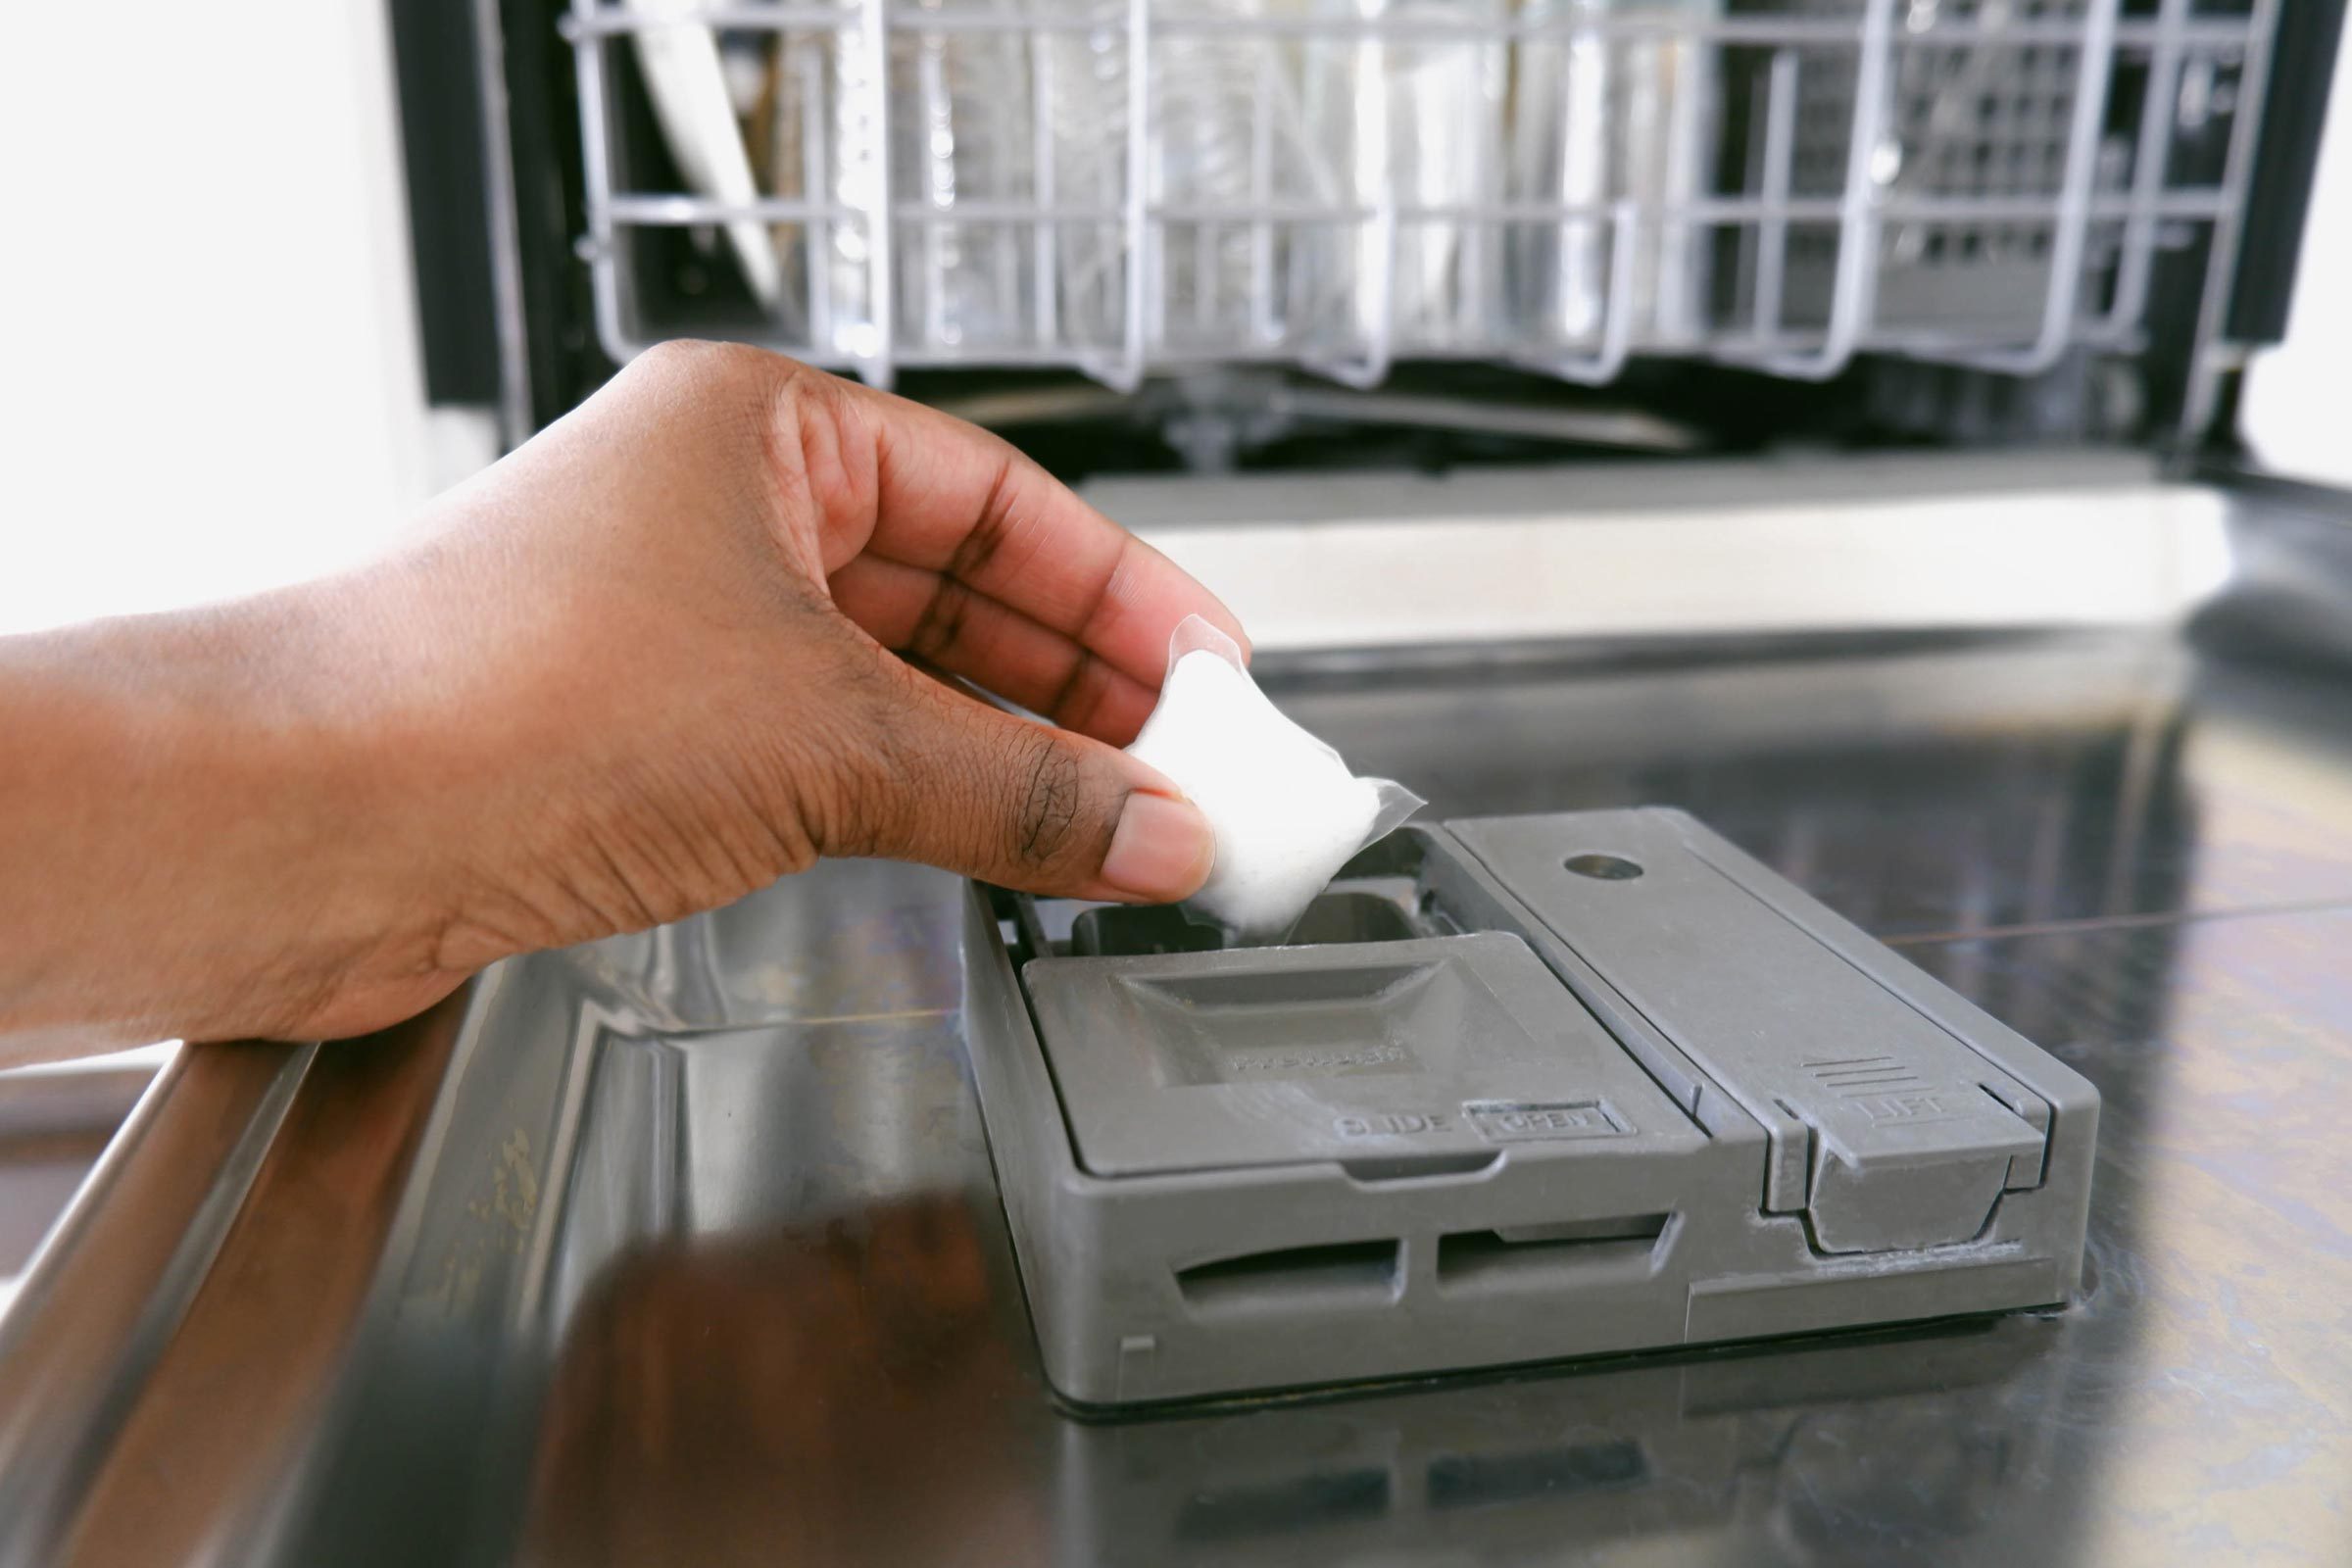 How to Load a Dishwasher (For Maximum Efficiency)